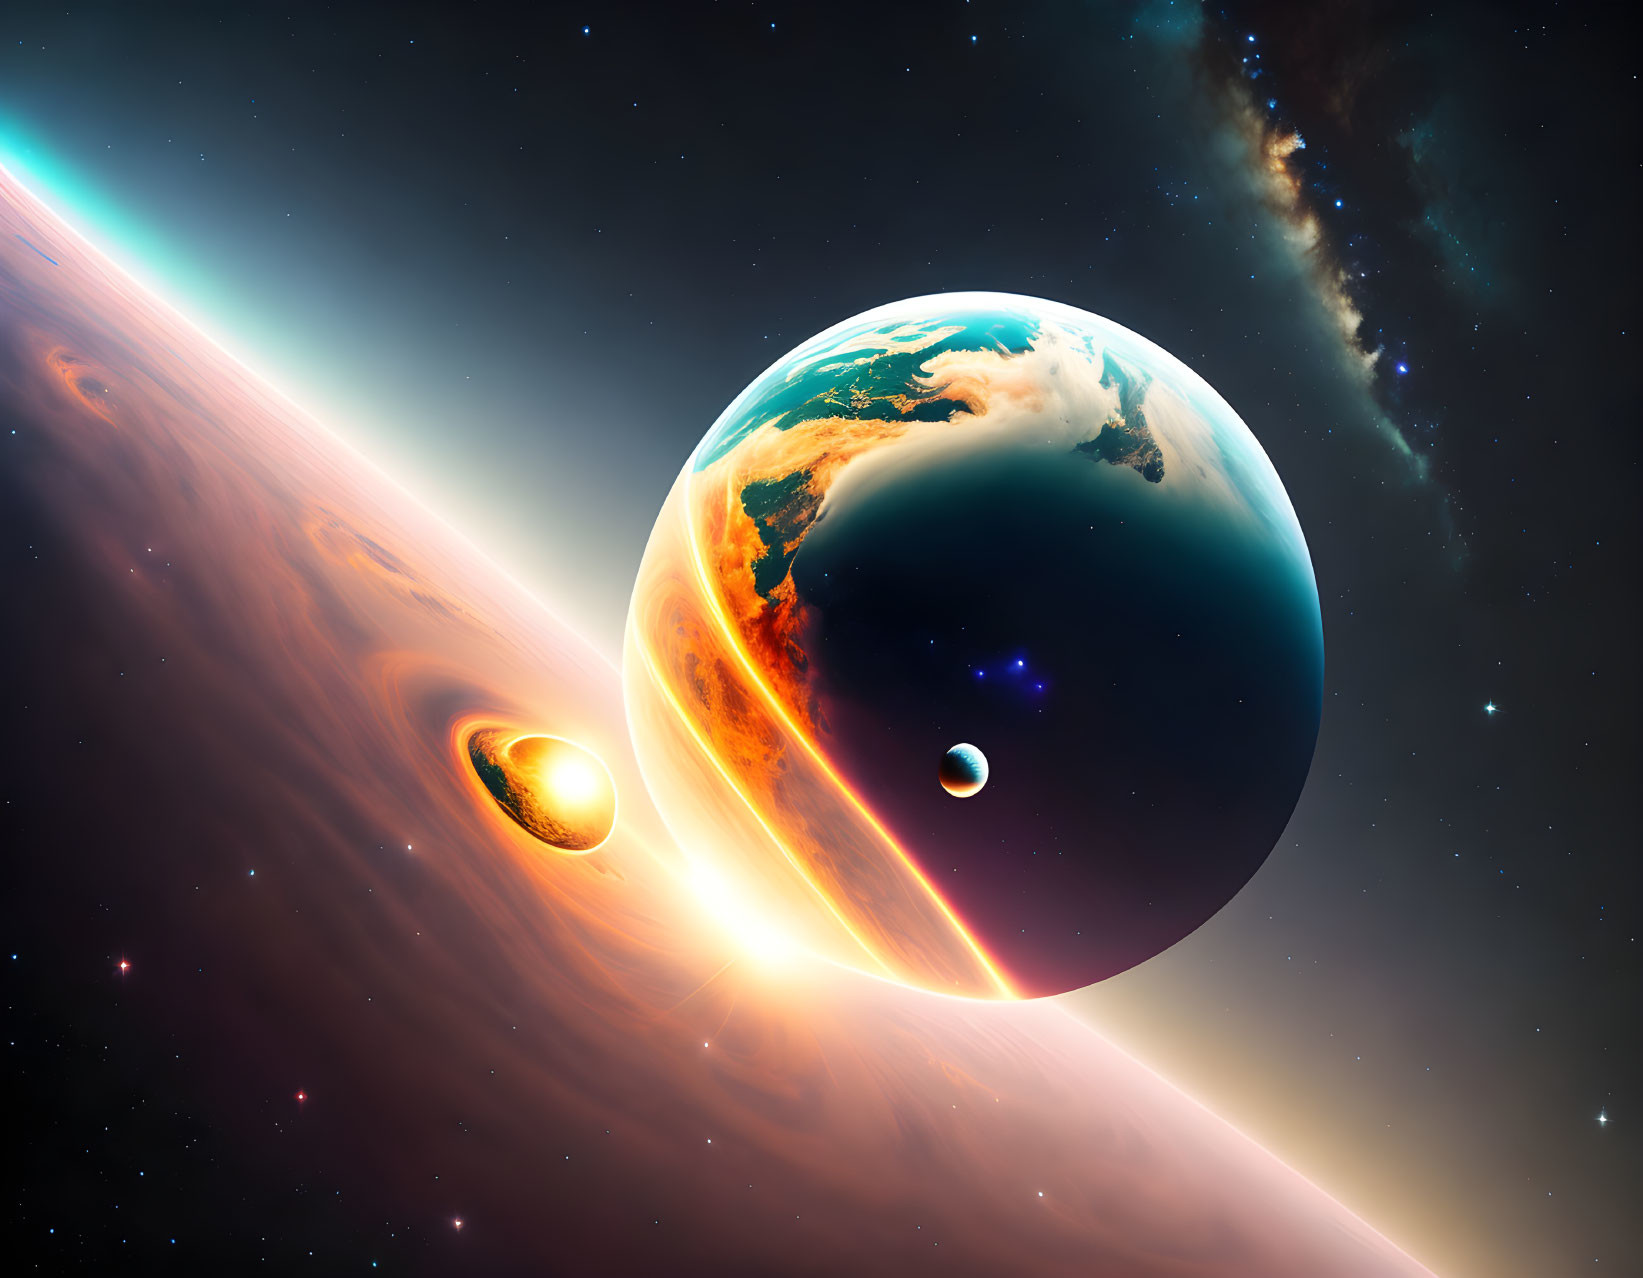 Colorful Space Scene with Earth, Moon, Fiery Planet, and Galaxy